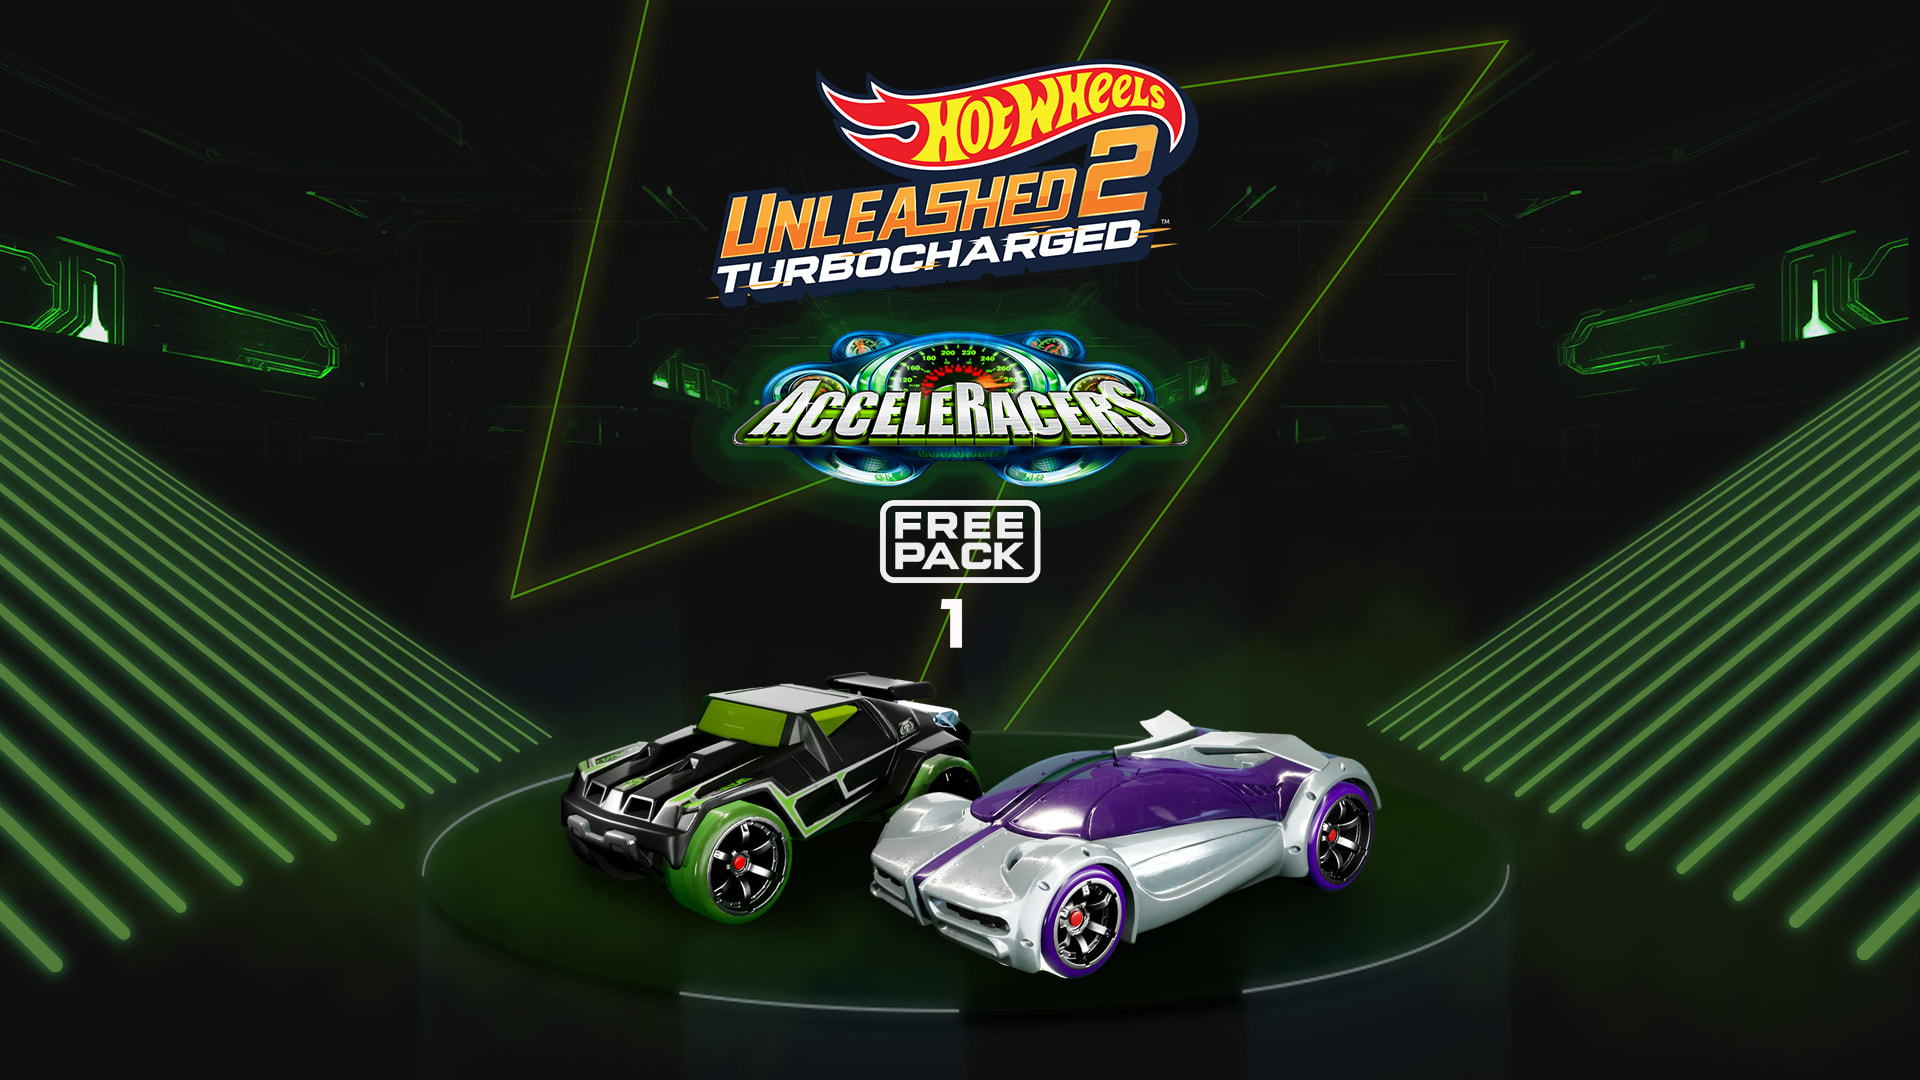 HOT WHEELS UNLEASHED™ 2 - AcceleRacers Free Pack 1 1